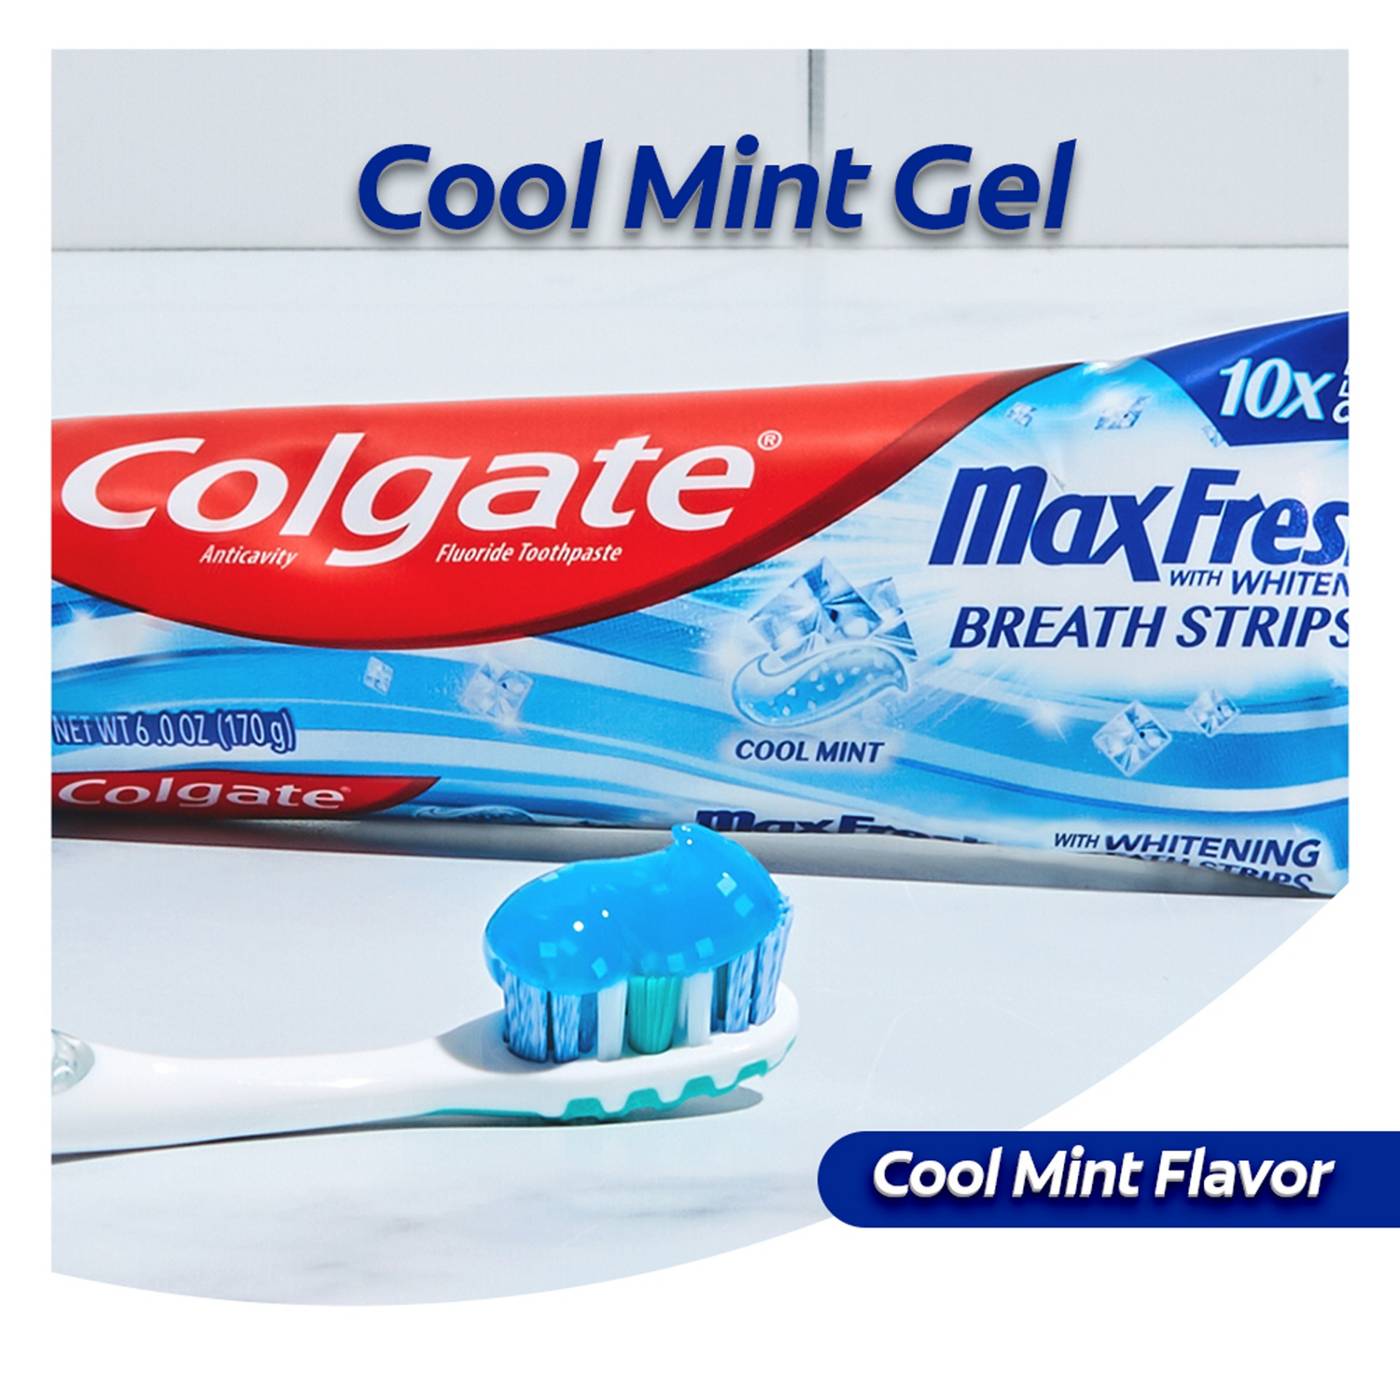 Colgate Max Fresh Anticavity Toothpaste 2 pk - Cool Mint; image 10 of 14